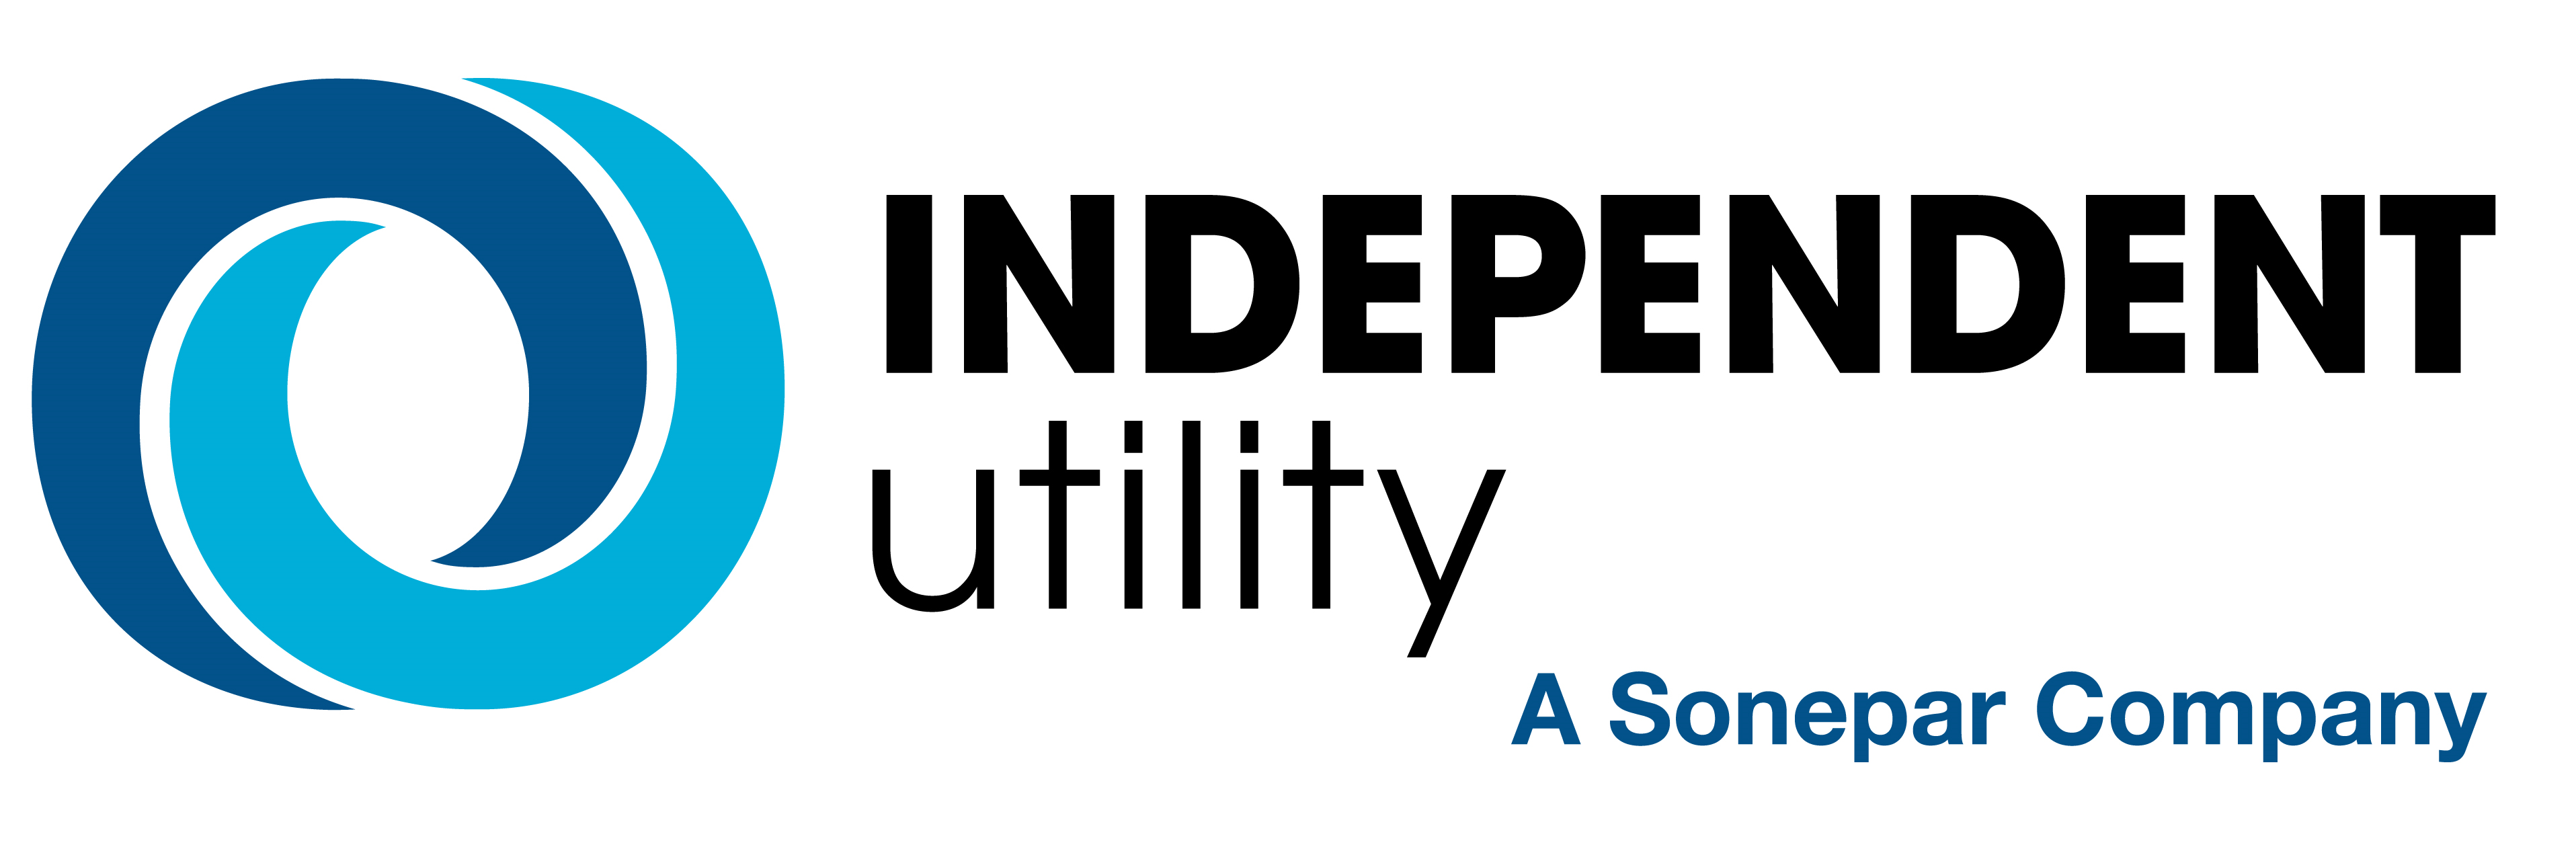 Independent Utility